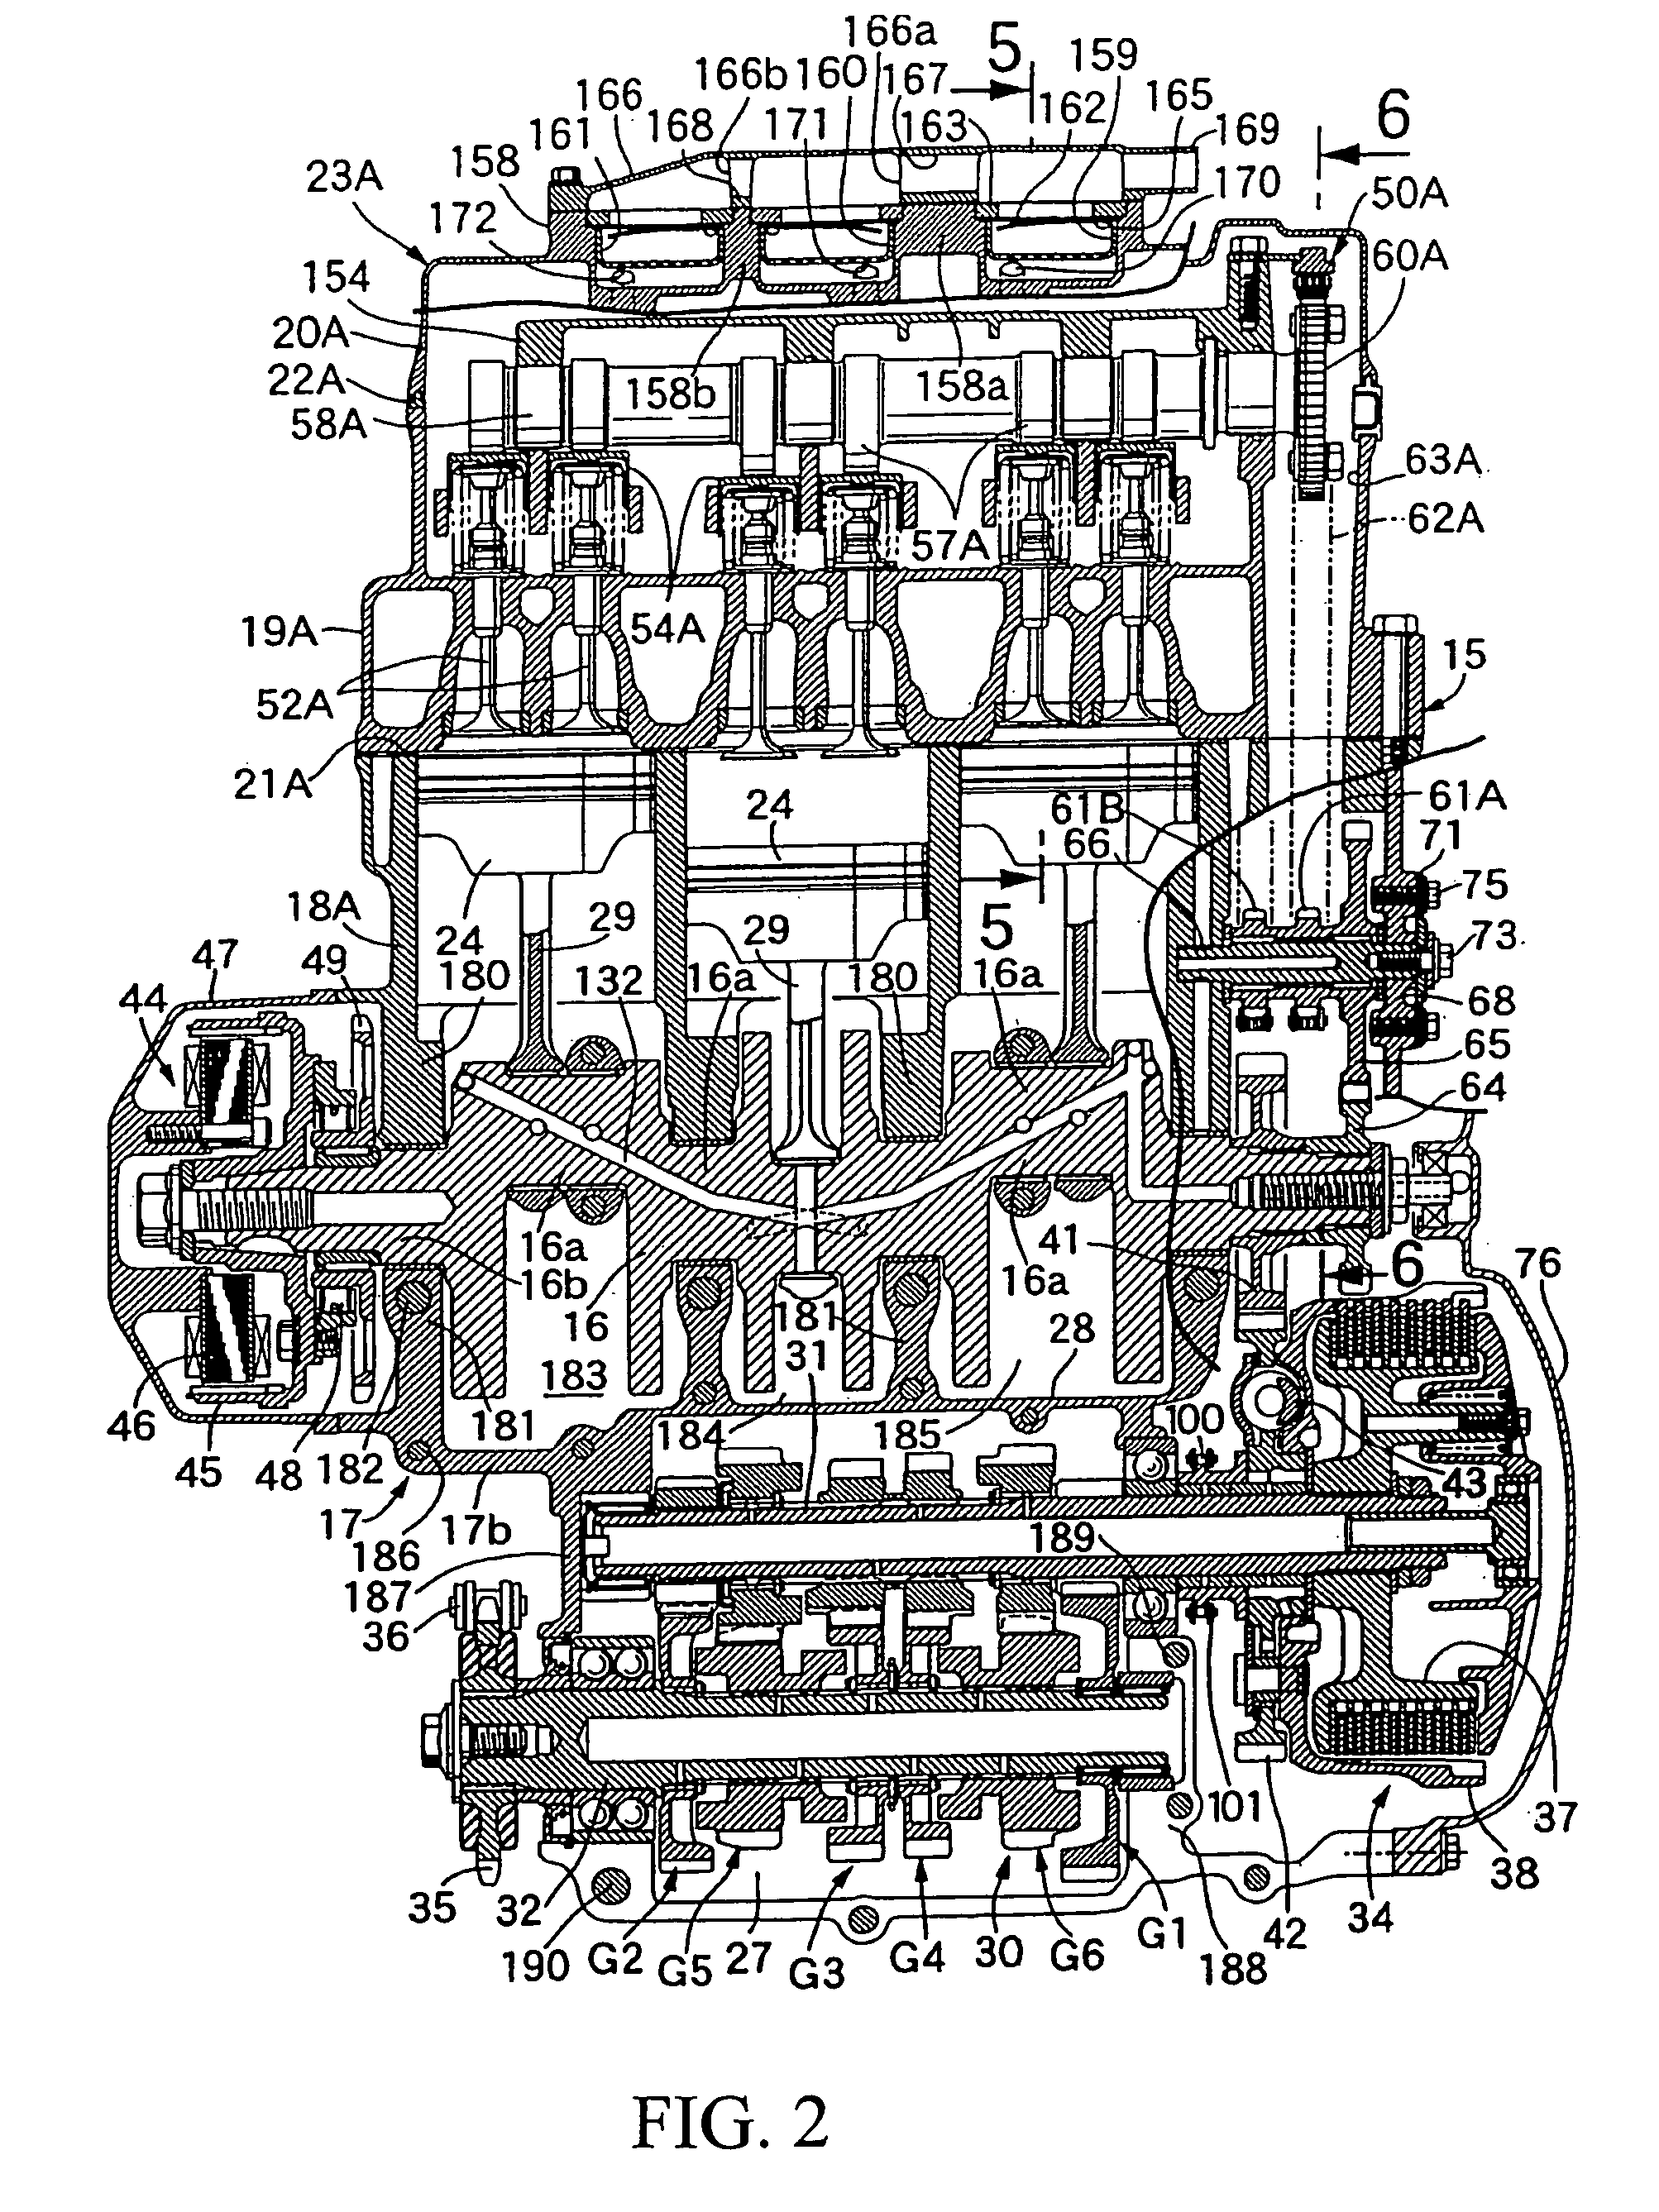 Cam drive gear and valve operating system drive gear for engine